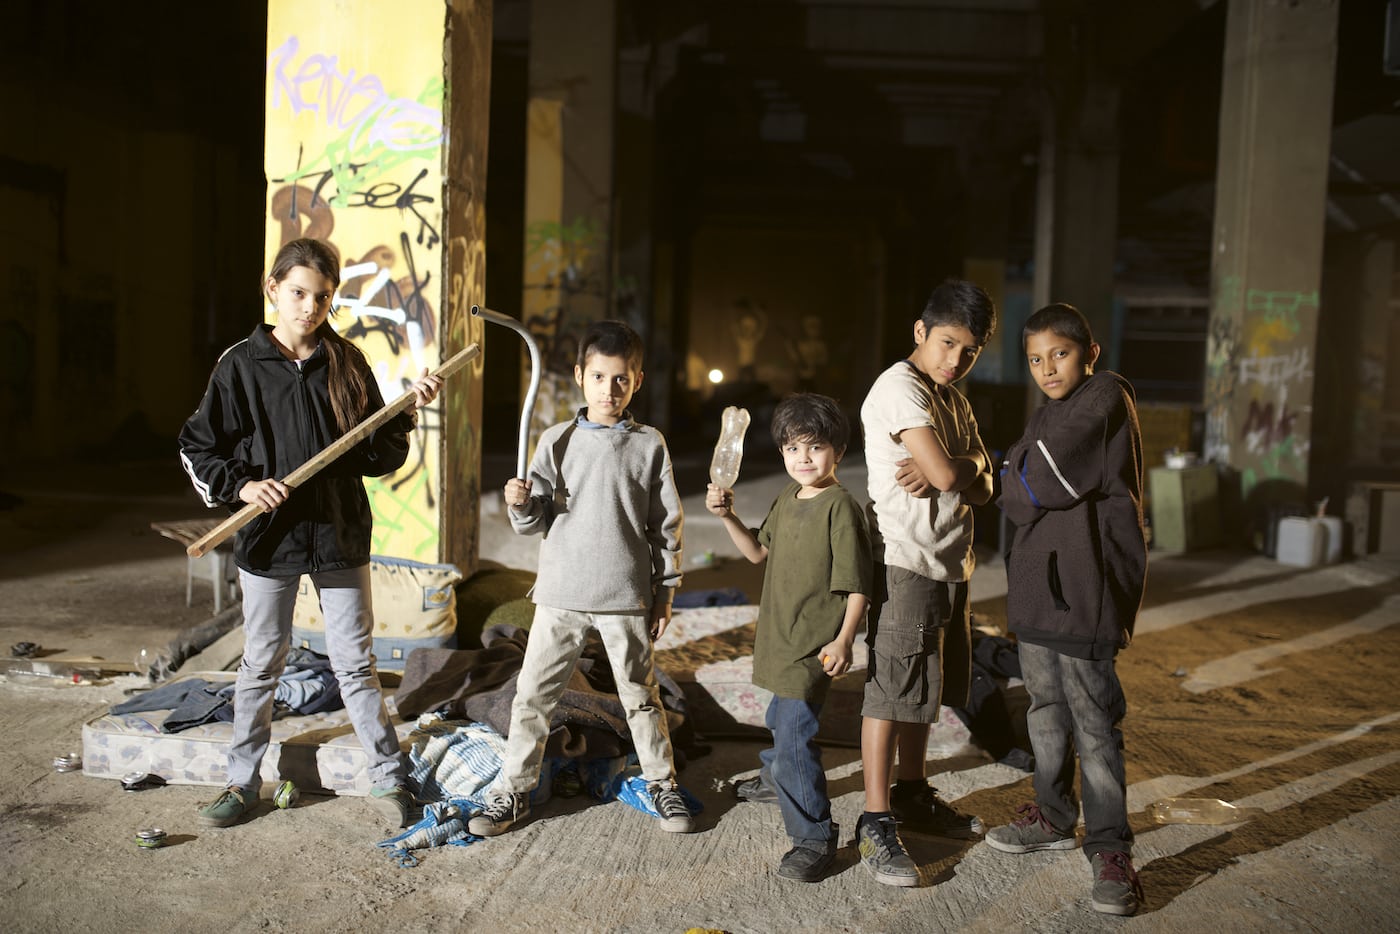 Photo: The group of children stand armed ready to protect themselves